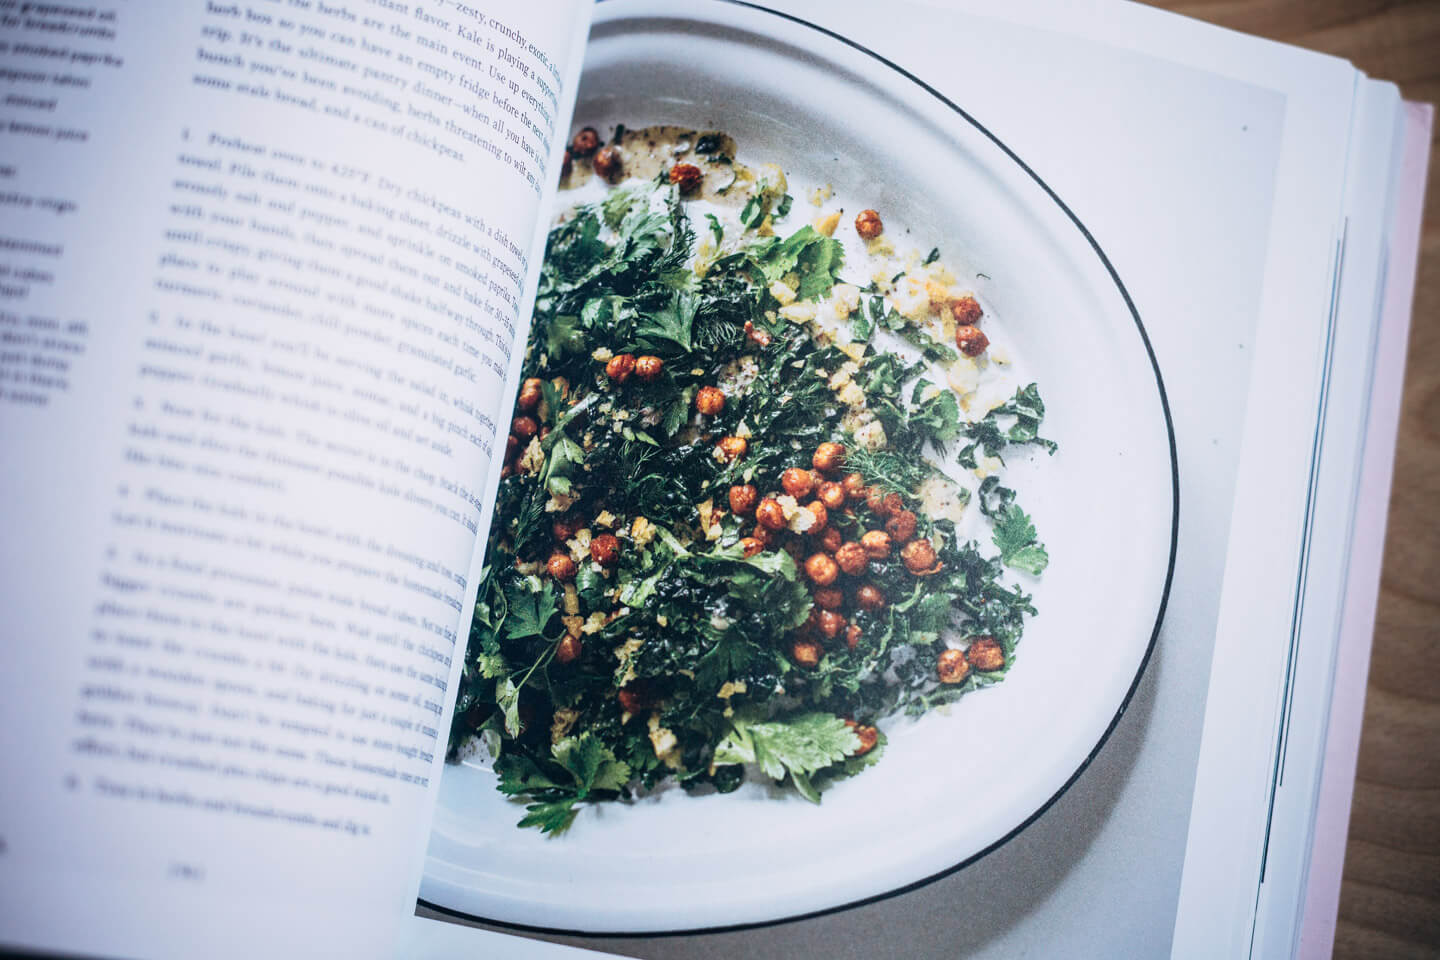 Kale and chickpea salad from The Huckle and Goose Cookbook by Anca Toderic and Christine Lucaciu.